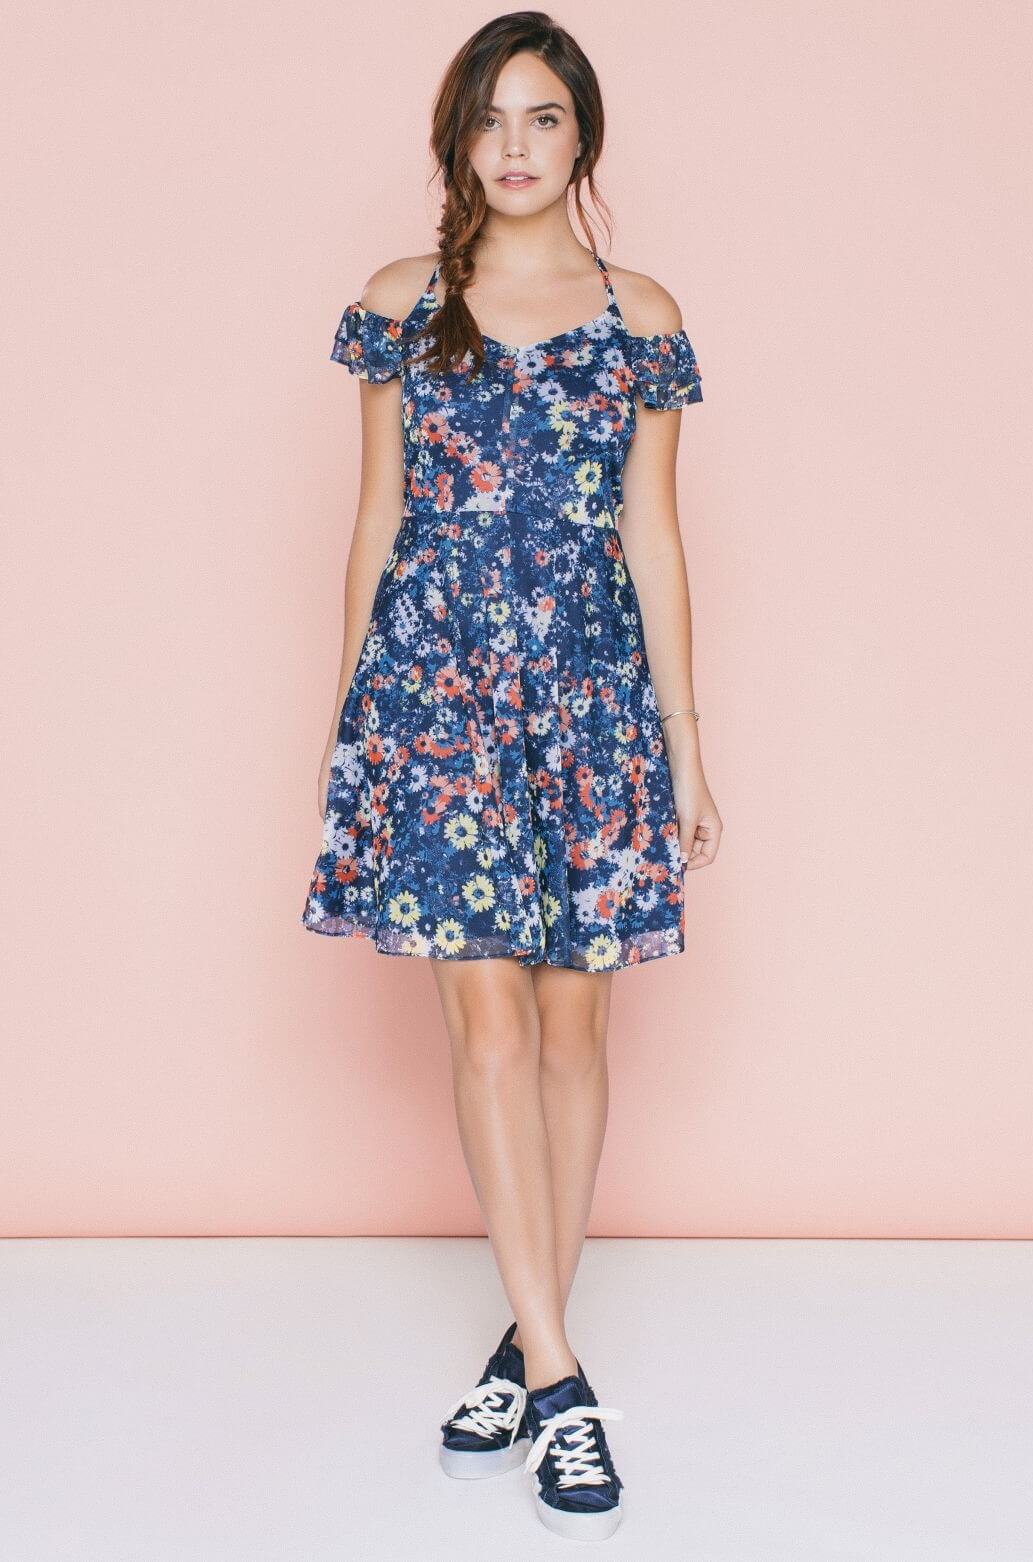 Bailee Madison  In Blue Printed Off Shoulder Short Dress At Nowadays  Campaign for Macy’s